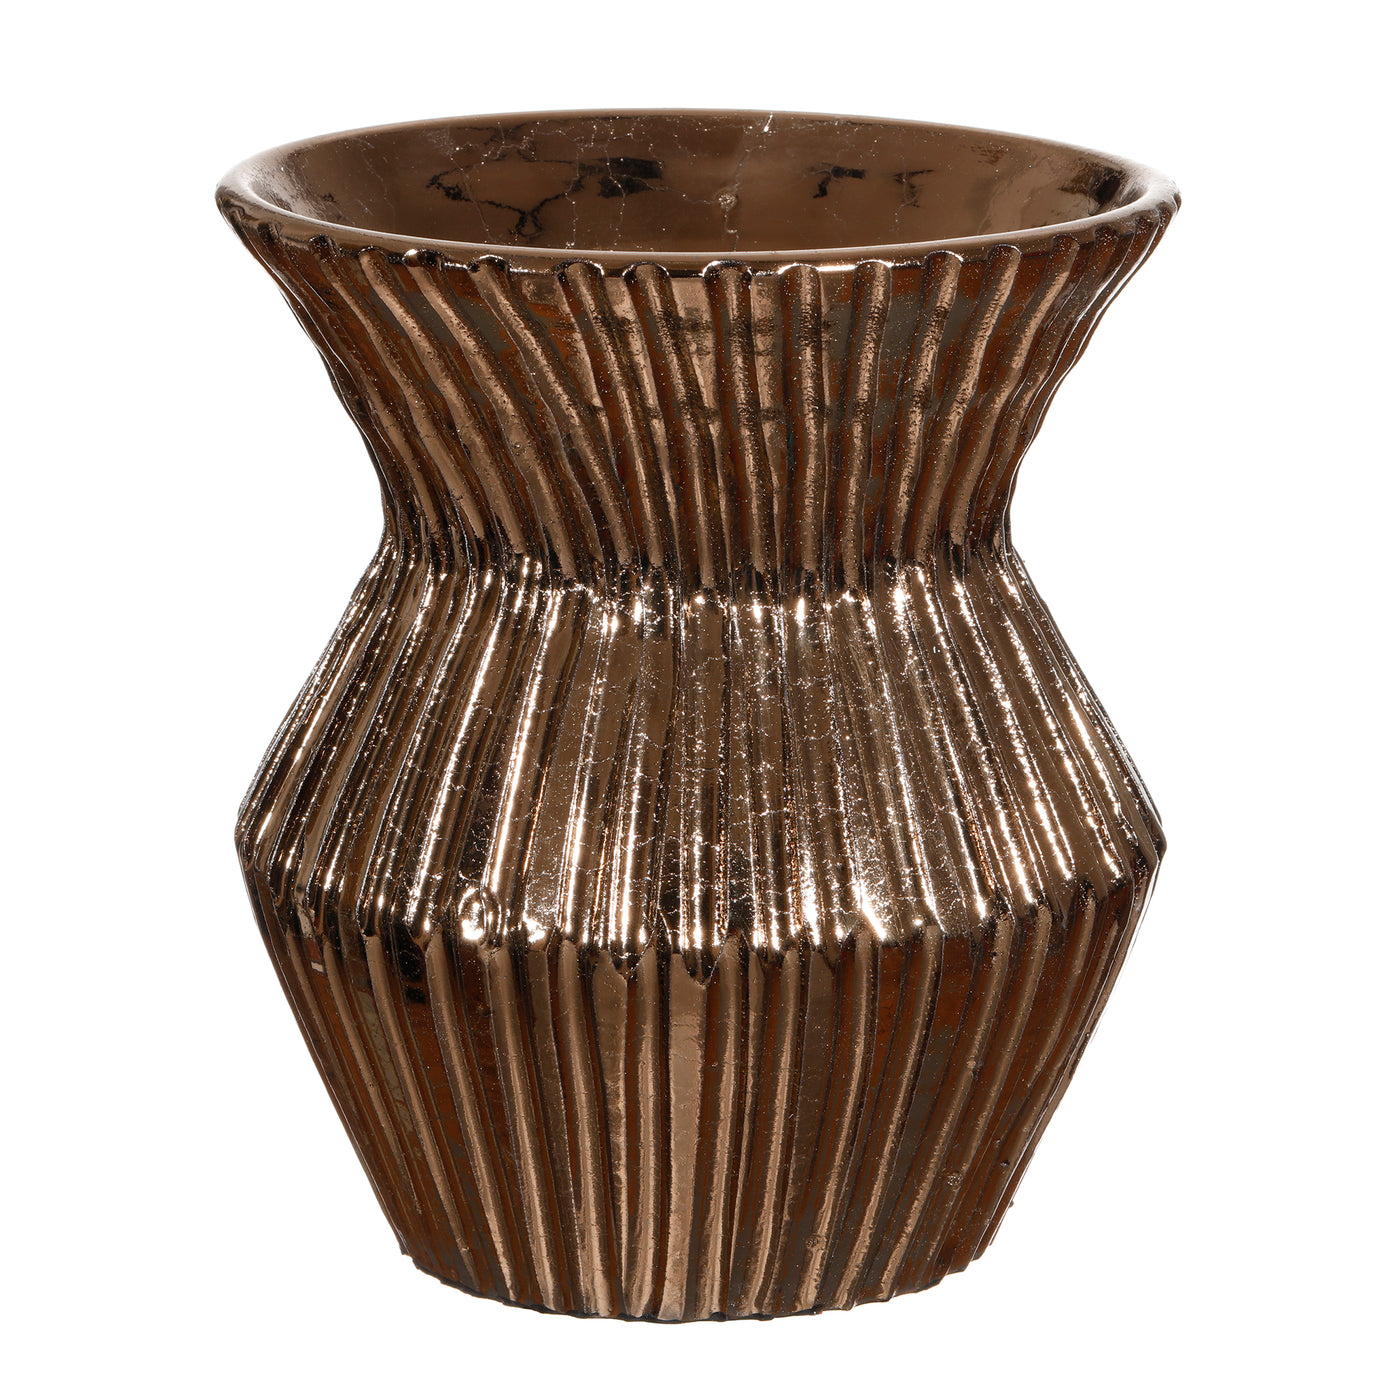 Contemporary hourglass-shaped ribbed vase in bronze gold